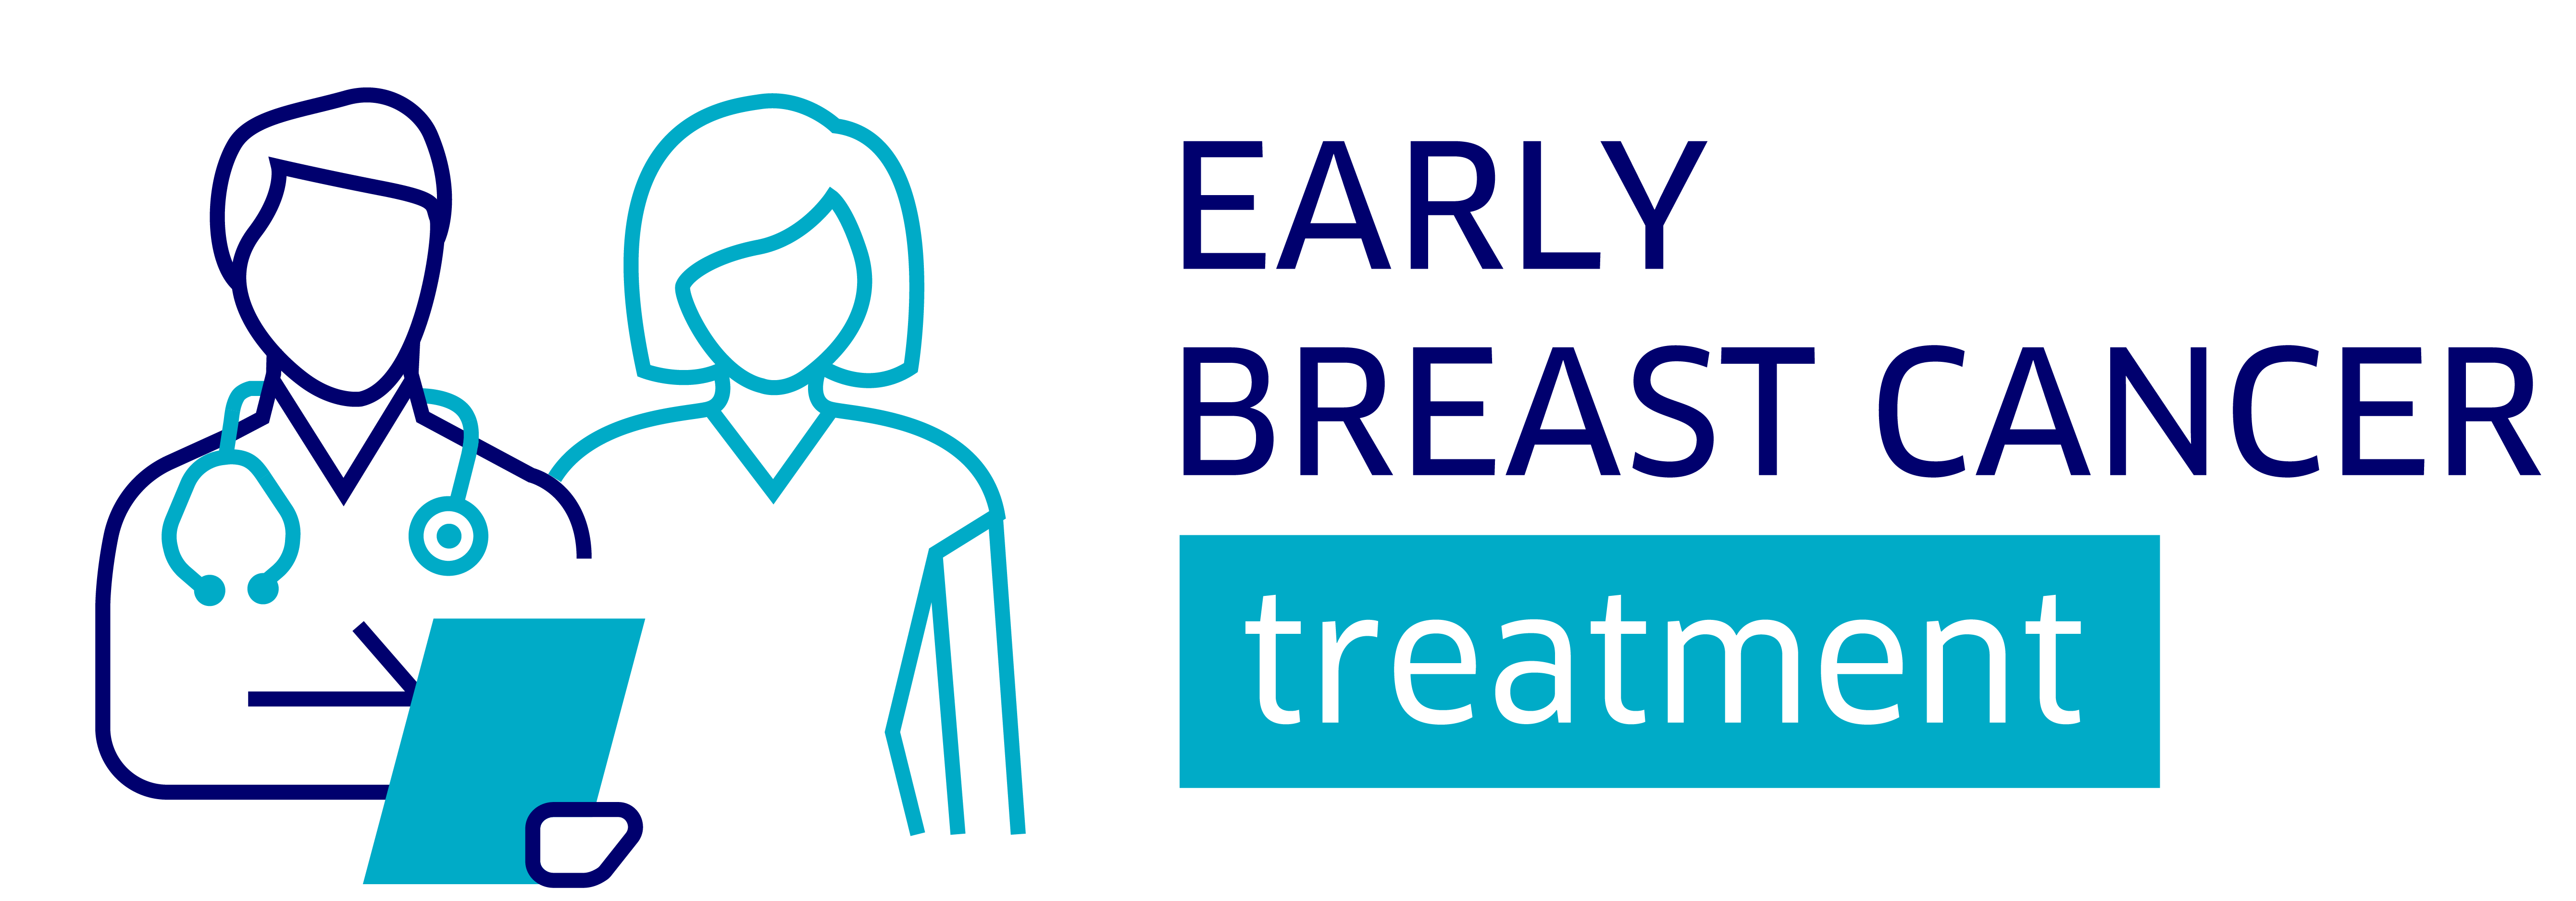 early breast cancer treatment